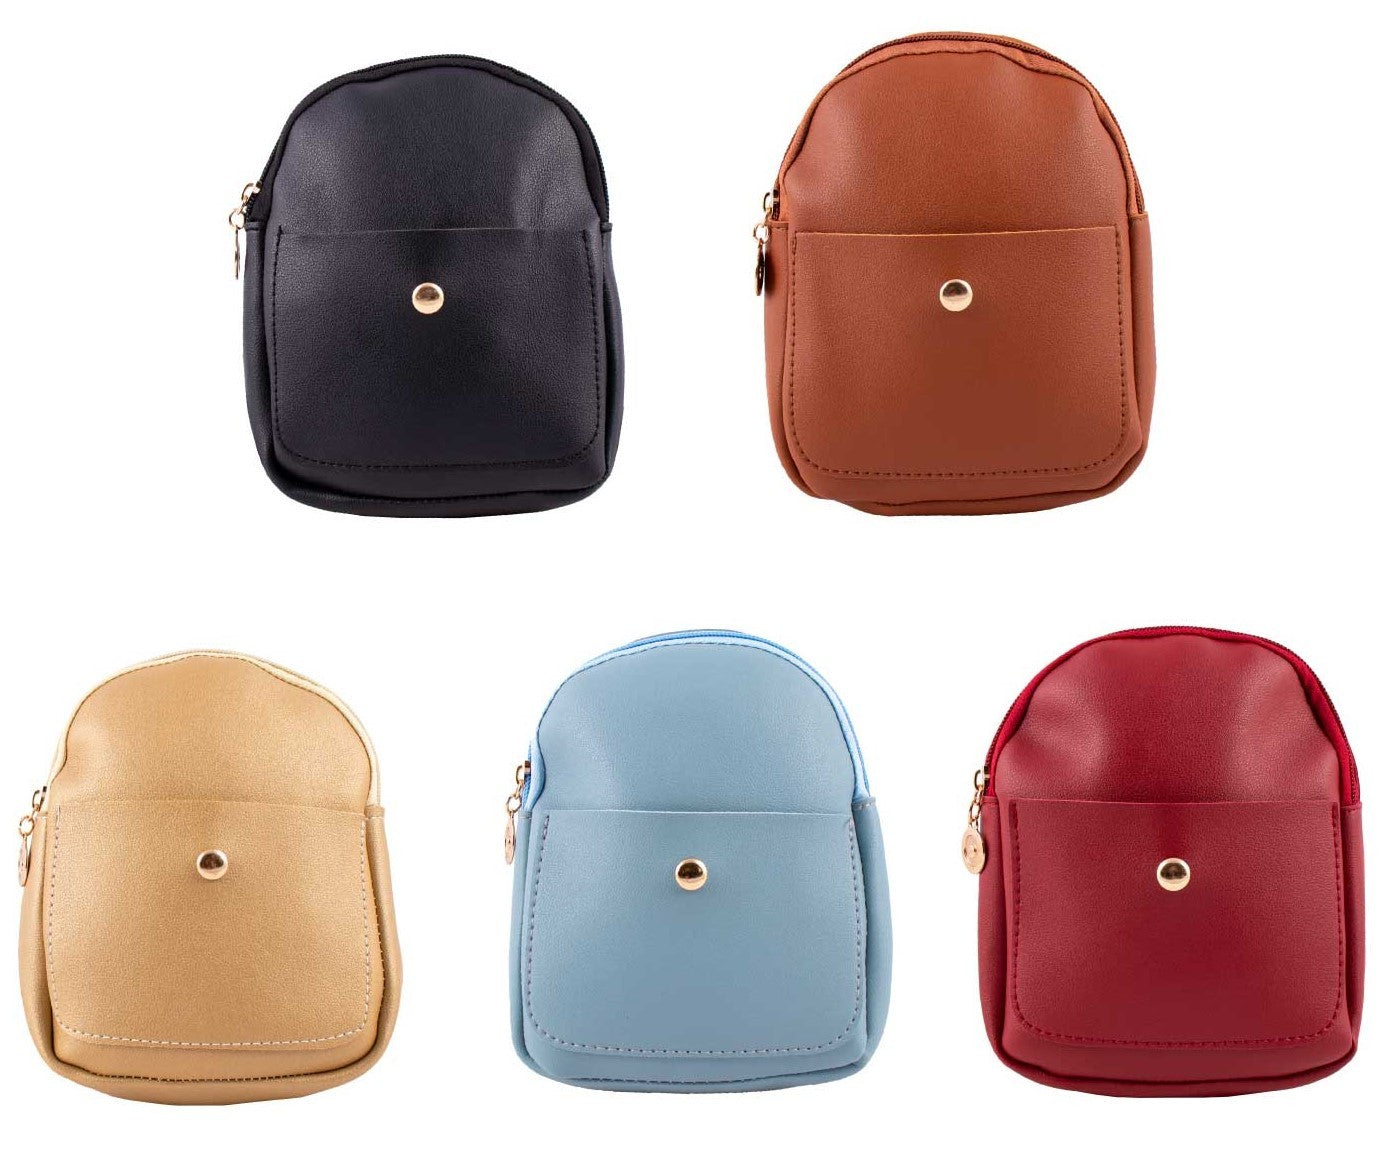 7" Wholesale Backpacks Mini Leather Fashion Purse in 4 Assorted Colors - Bulk Case of 24 - 9816-24